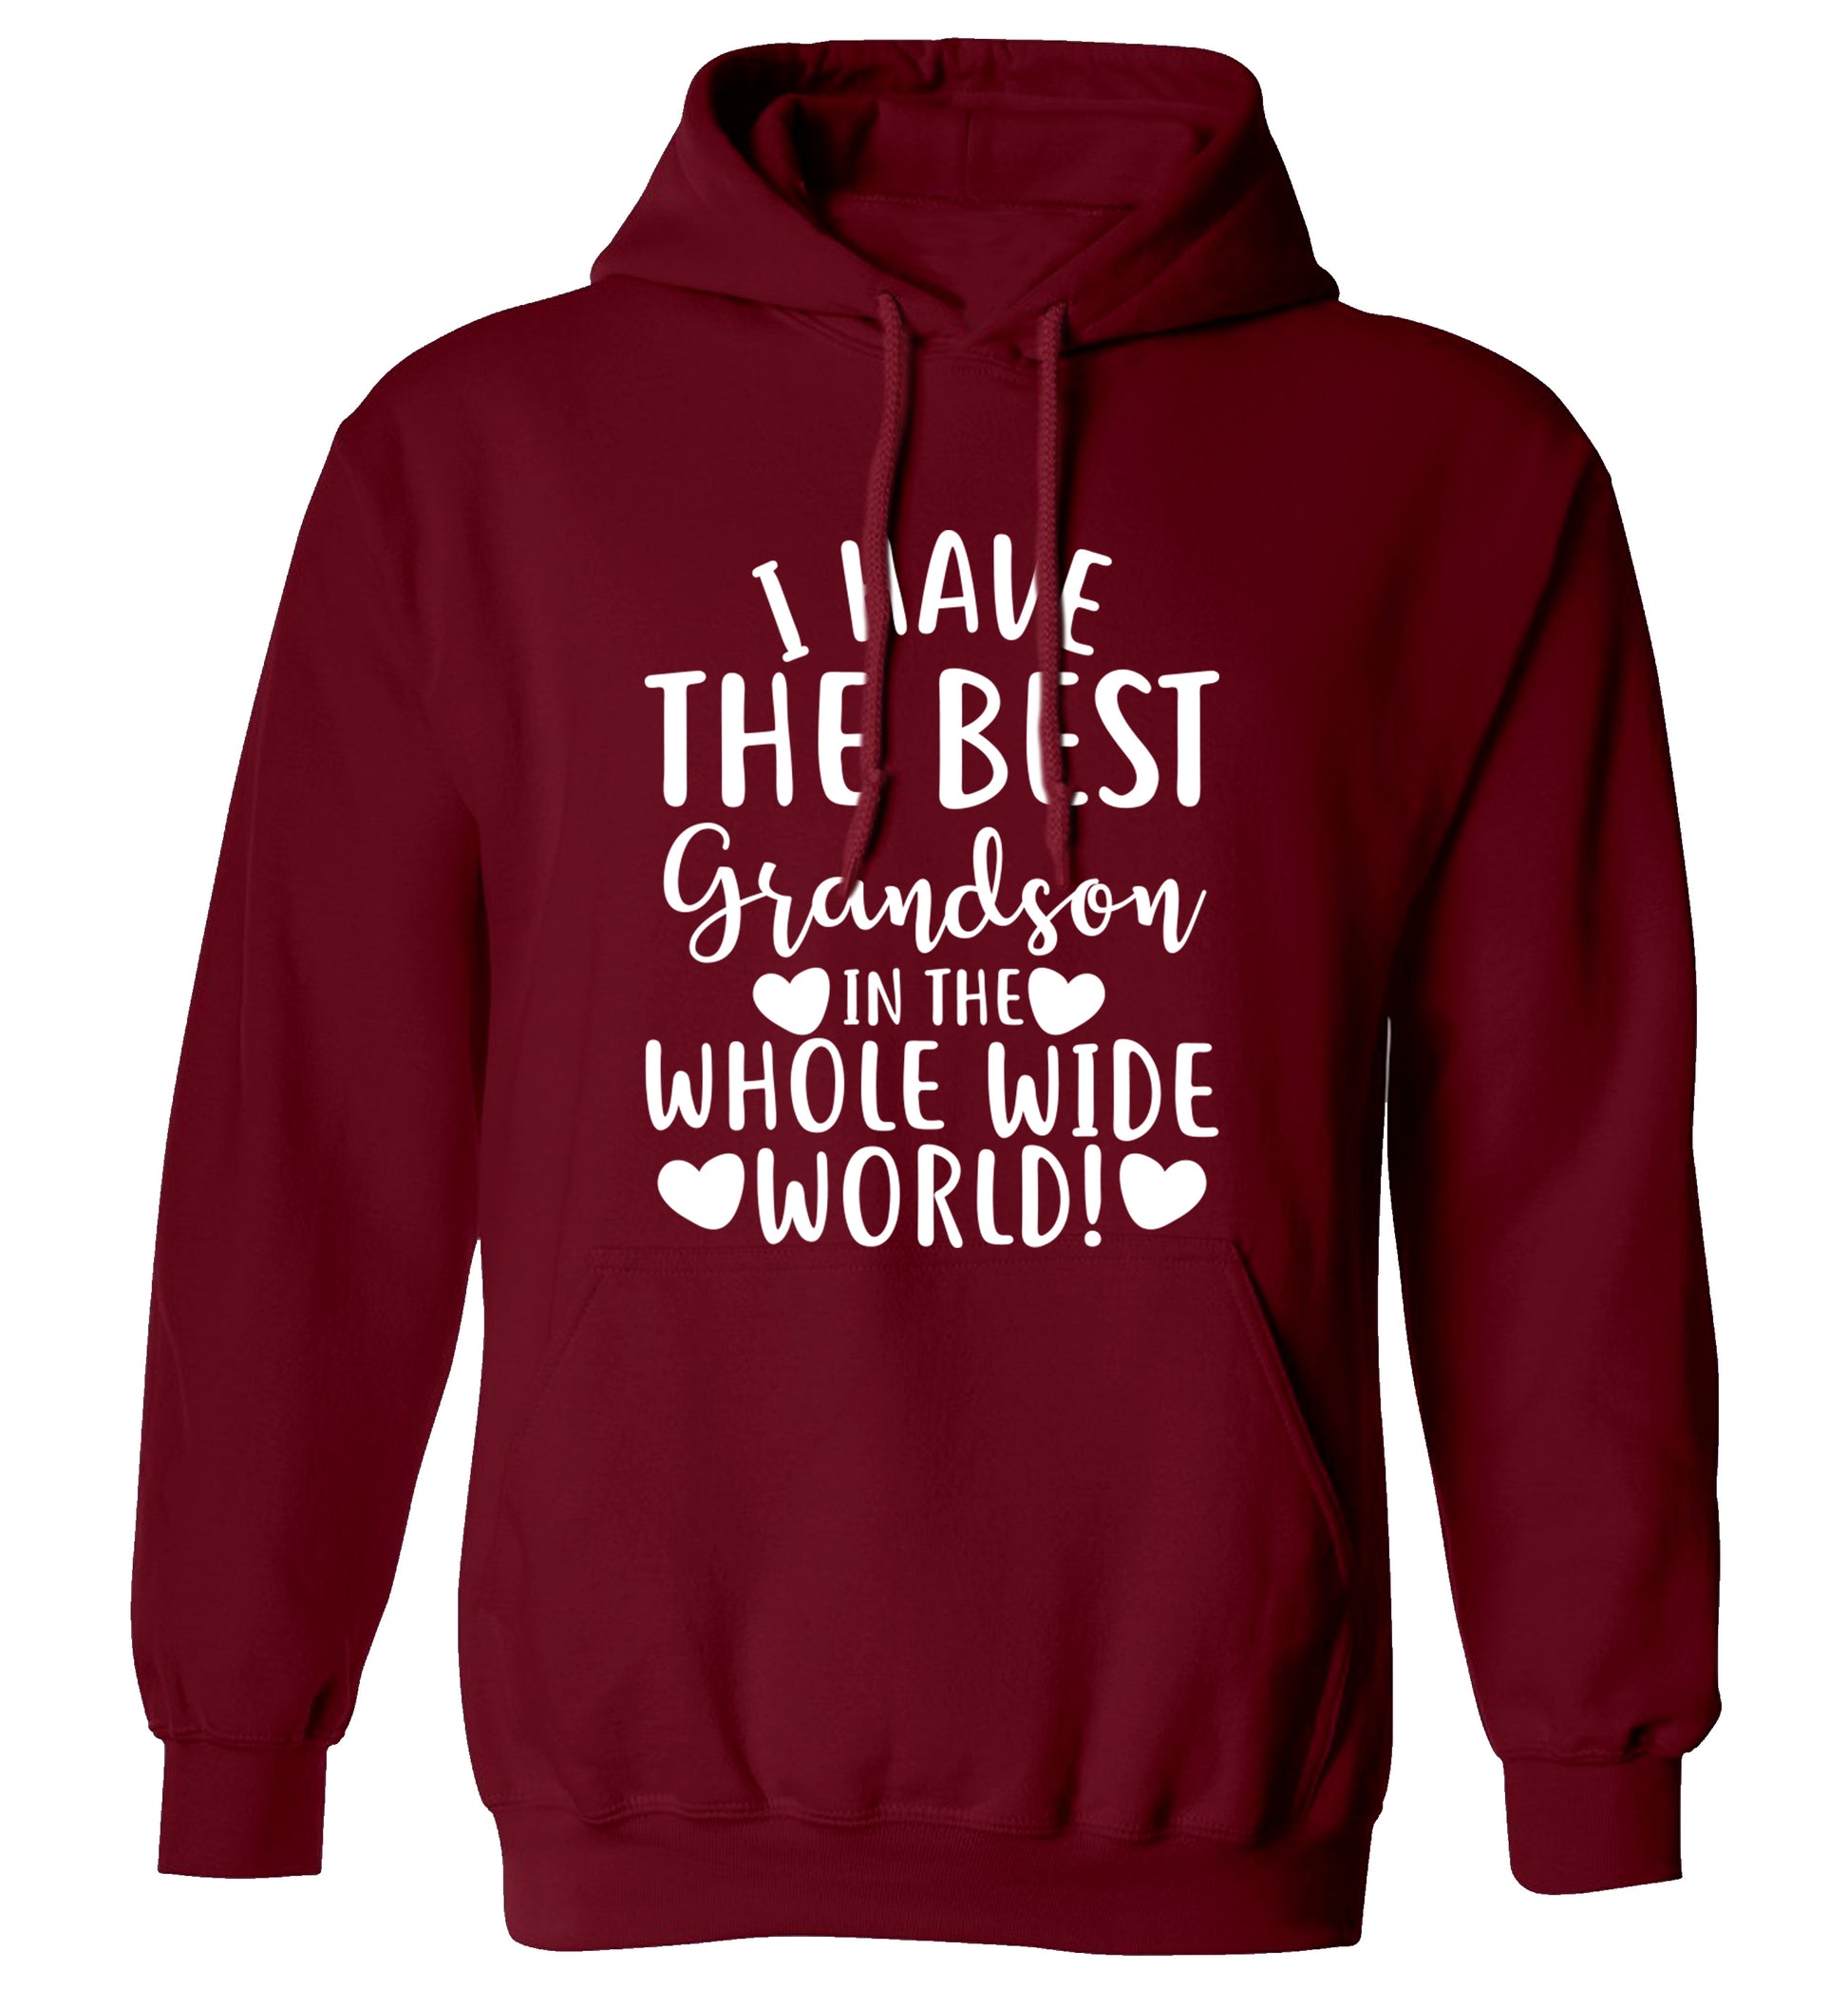 I have the best grandson in the whole wide world! adults unisex maroon hoodie 2XL